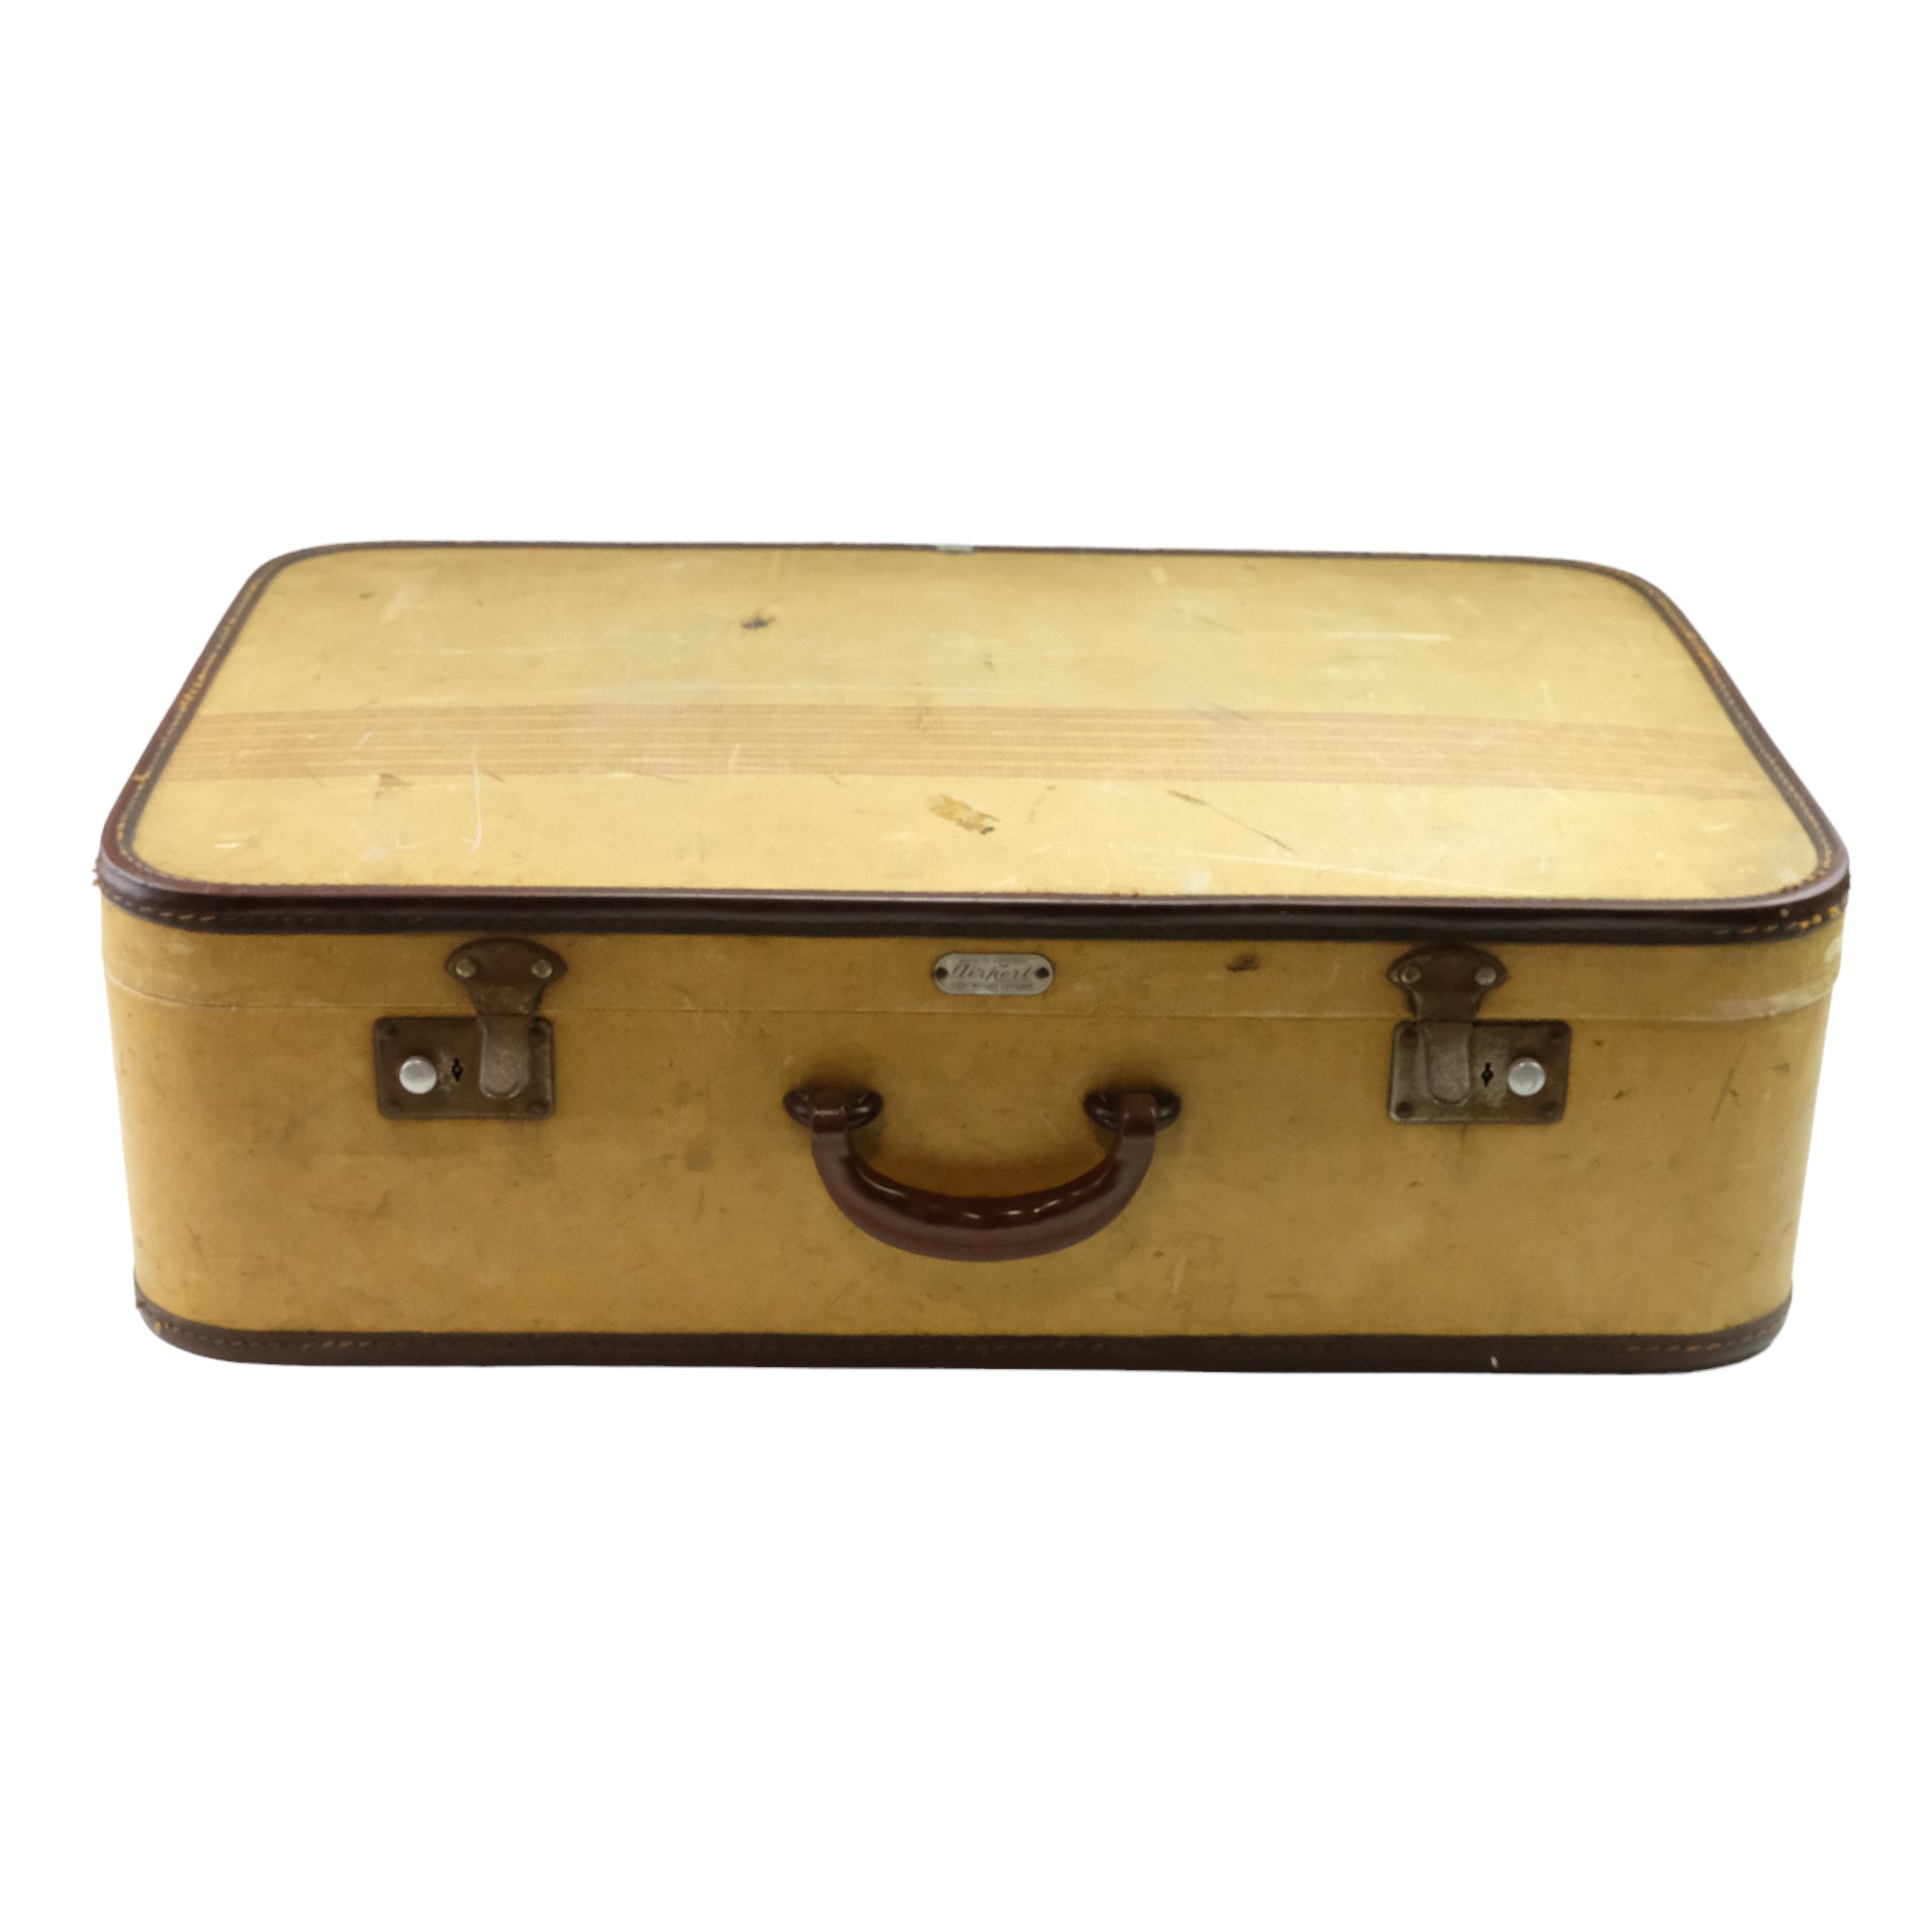 A 1940s-1950s suitcase bearing an 'Airport Registered Lightweight Luggage' label, 68 x 20.5 x 45 cm - Image 2 of 2